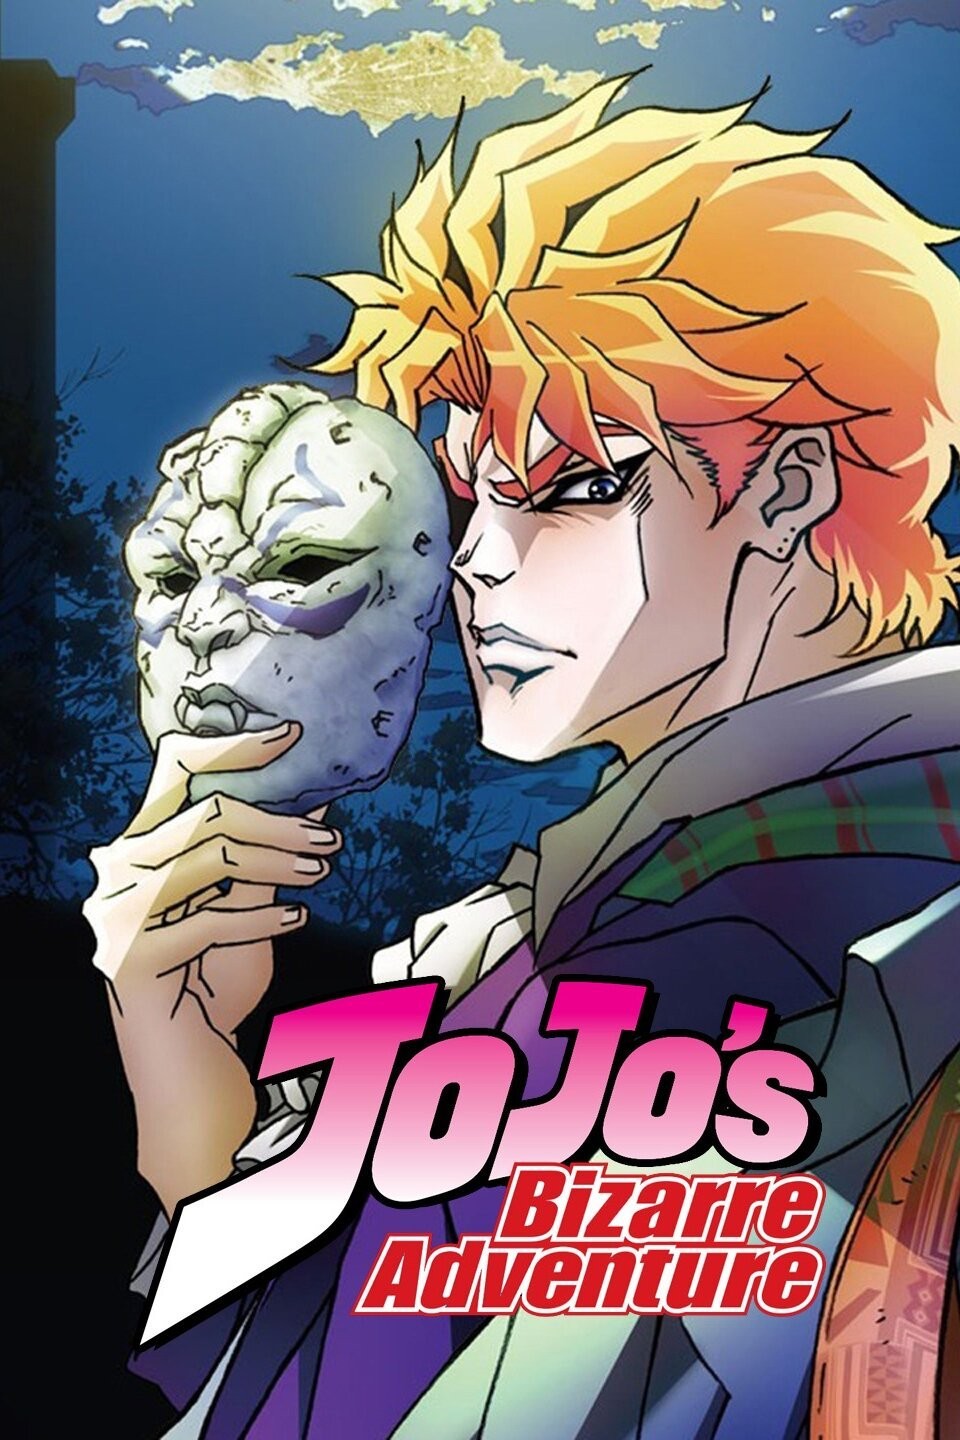 What Are The Most Rewatchable JJBA Episodes?